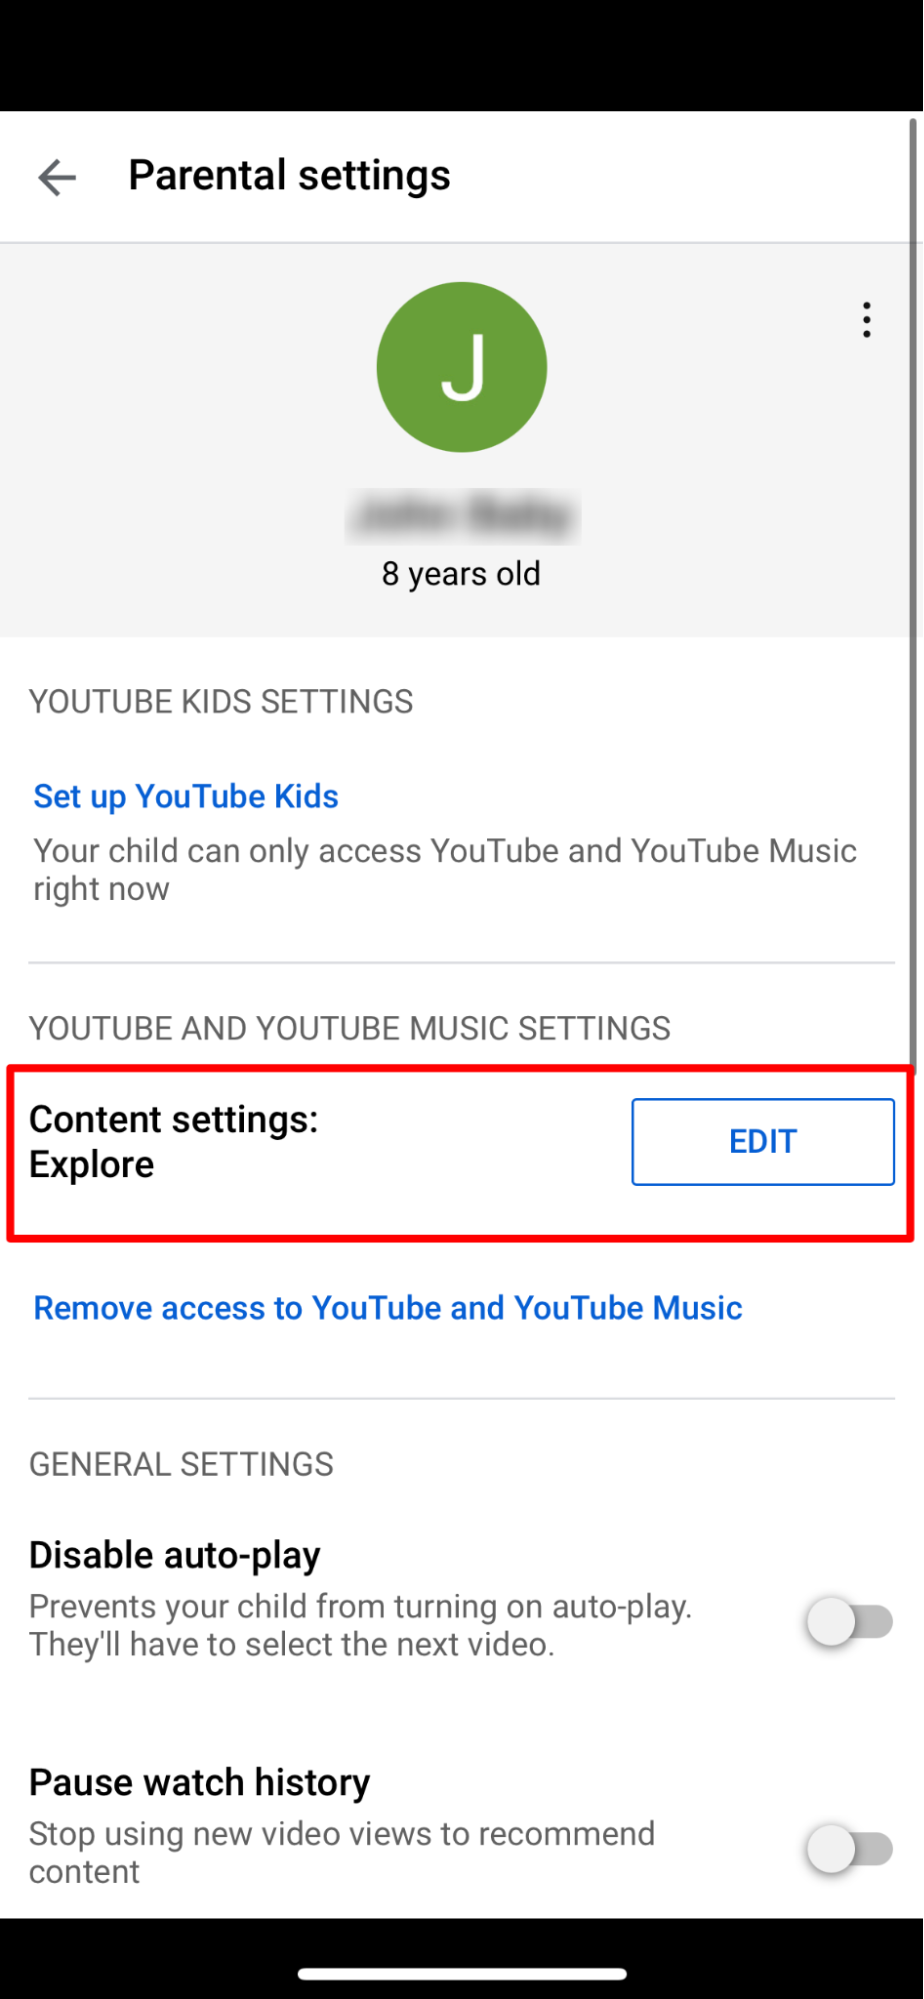 How to put parental controls on YouTube 55